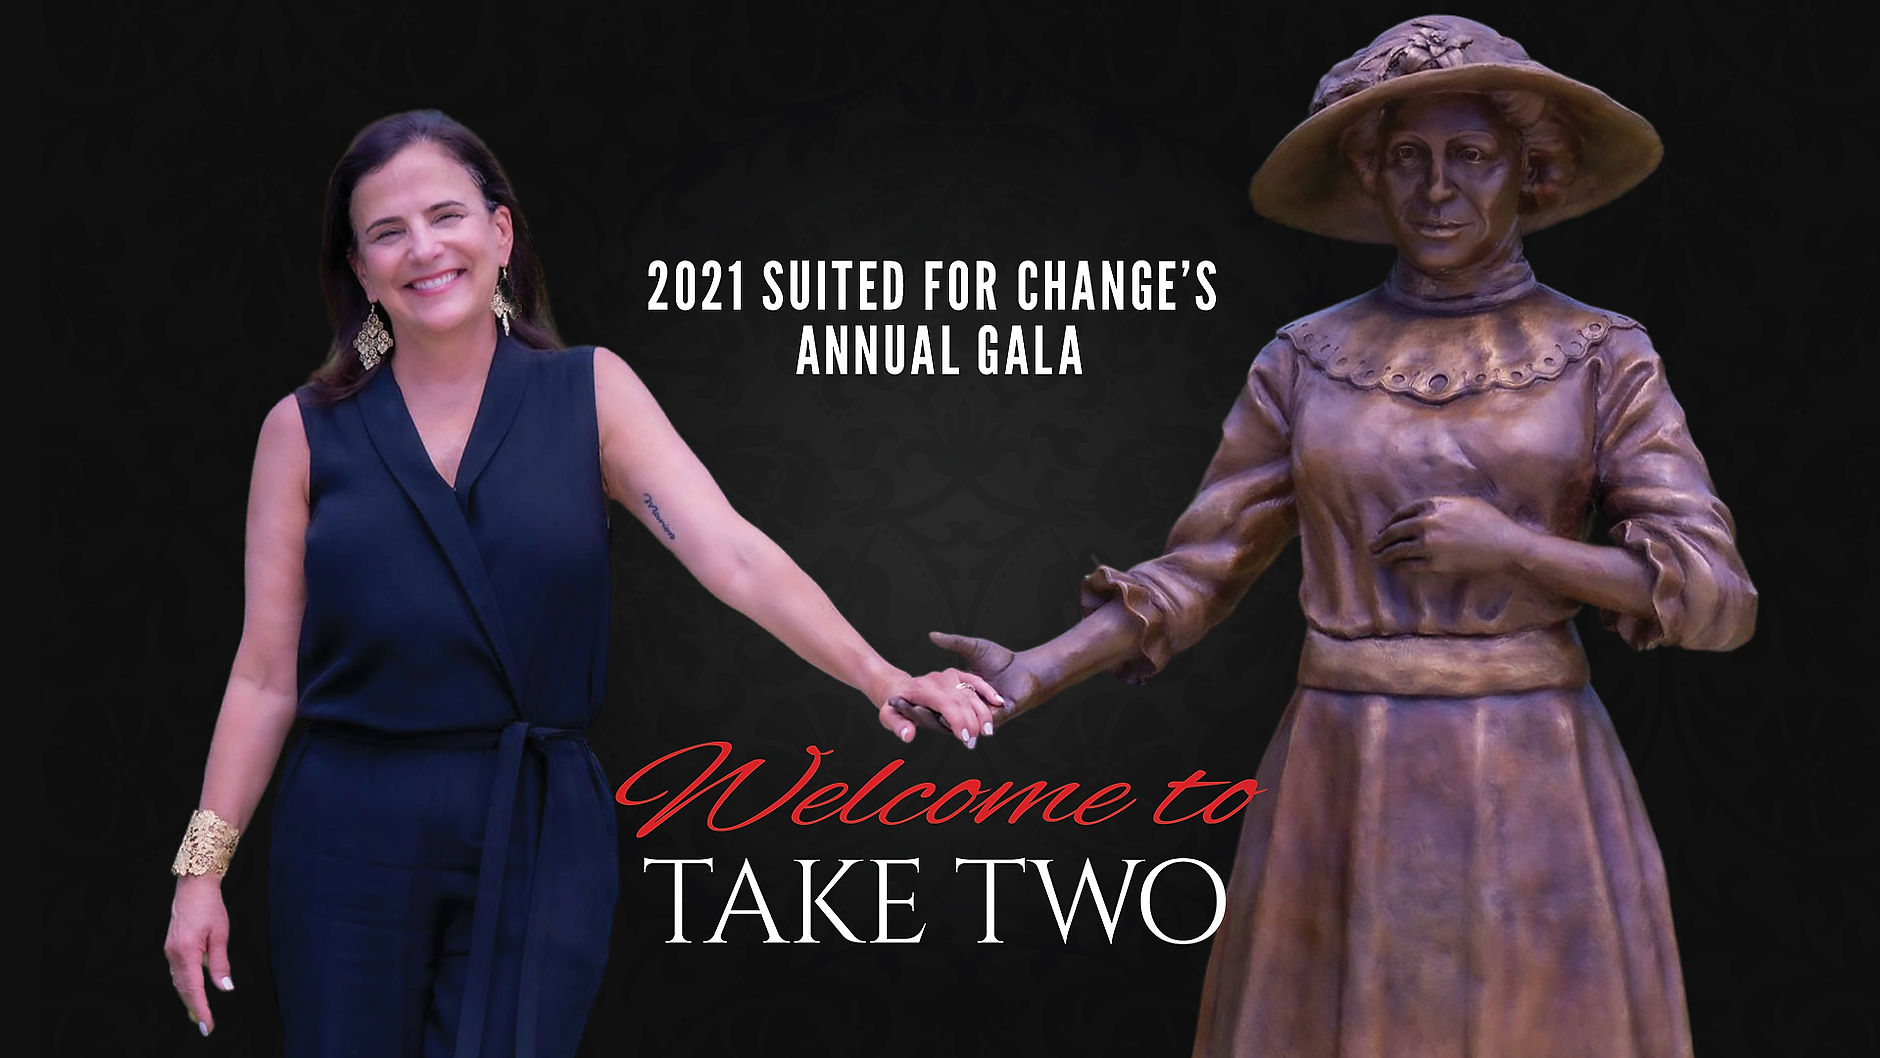 2021Suited For Change's Annual Gala